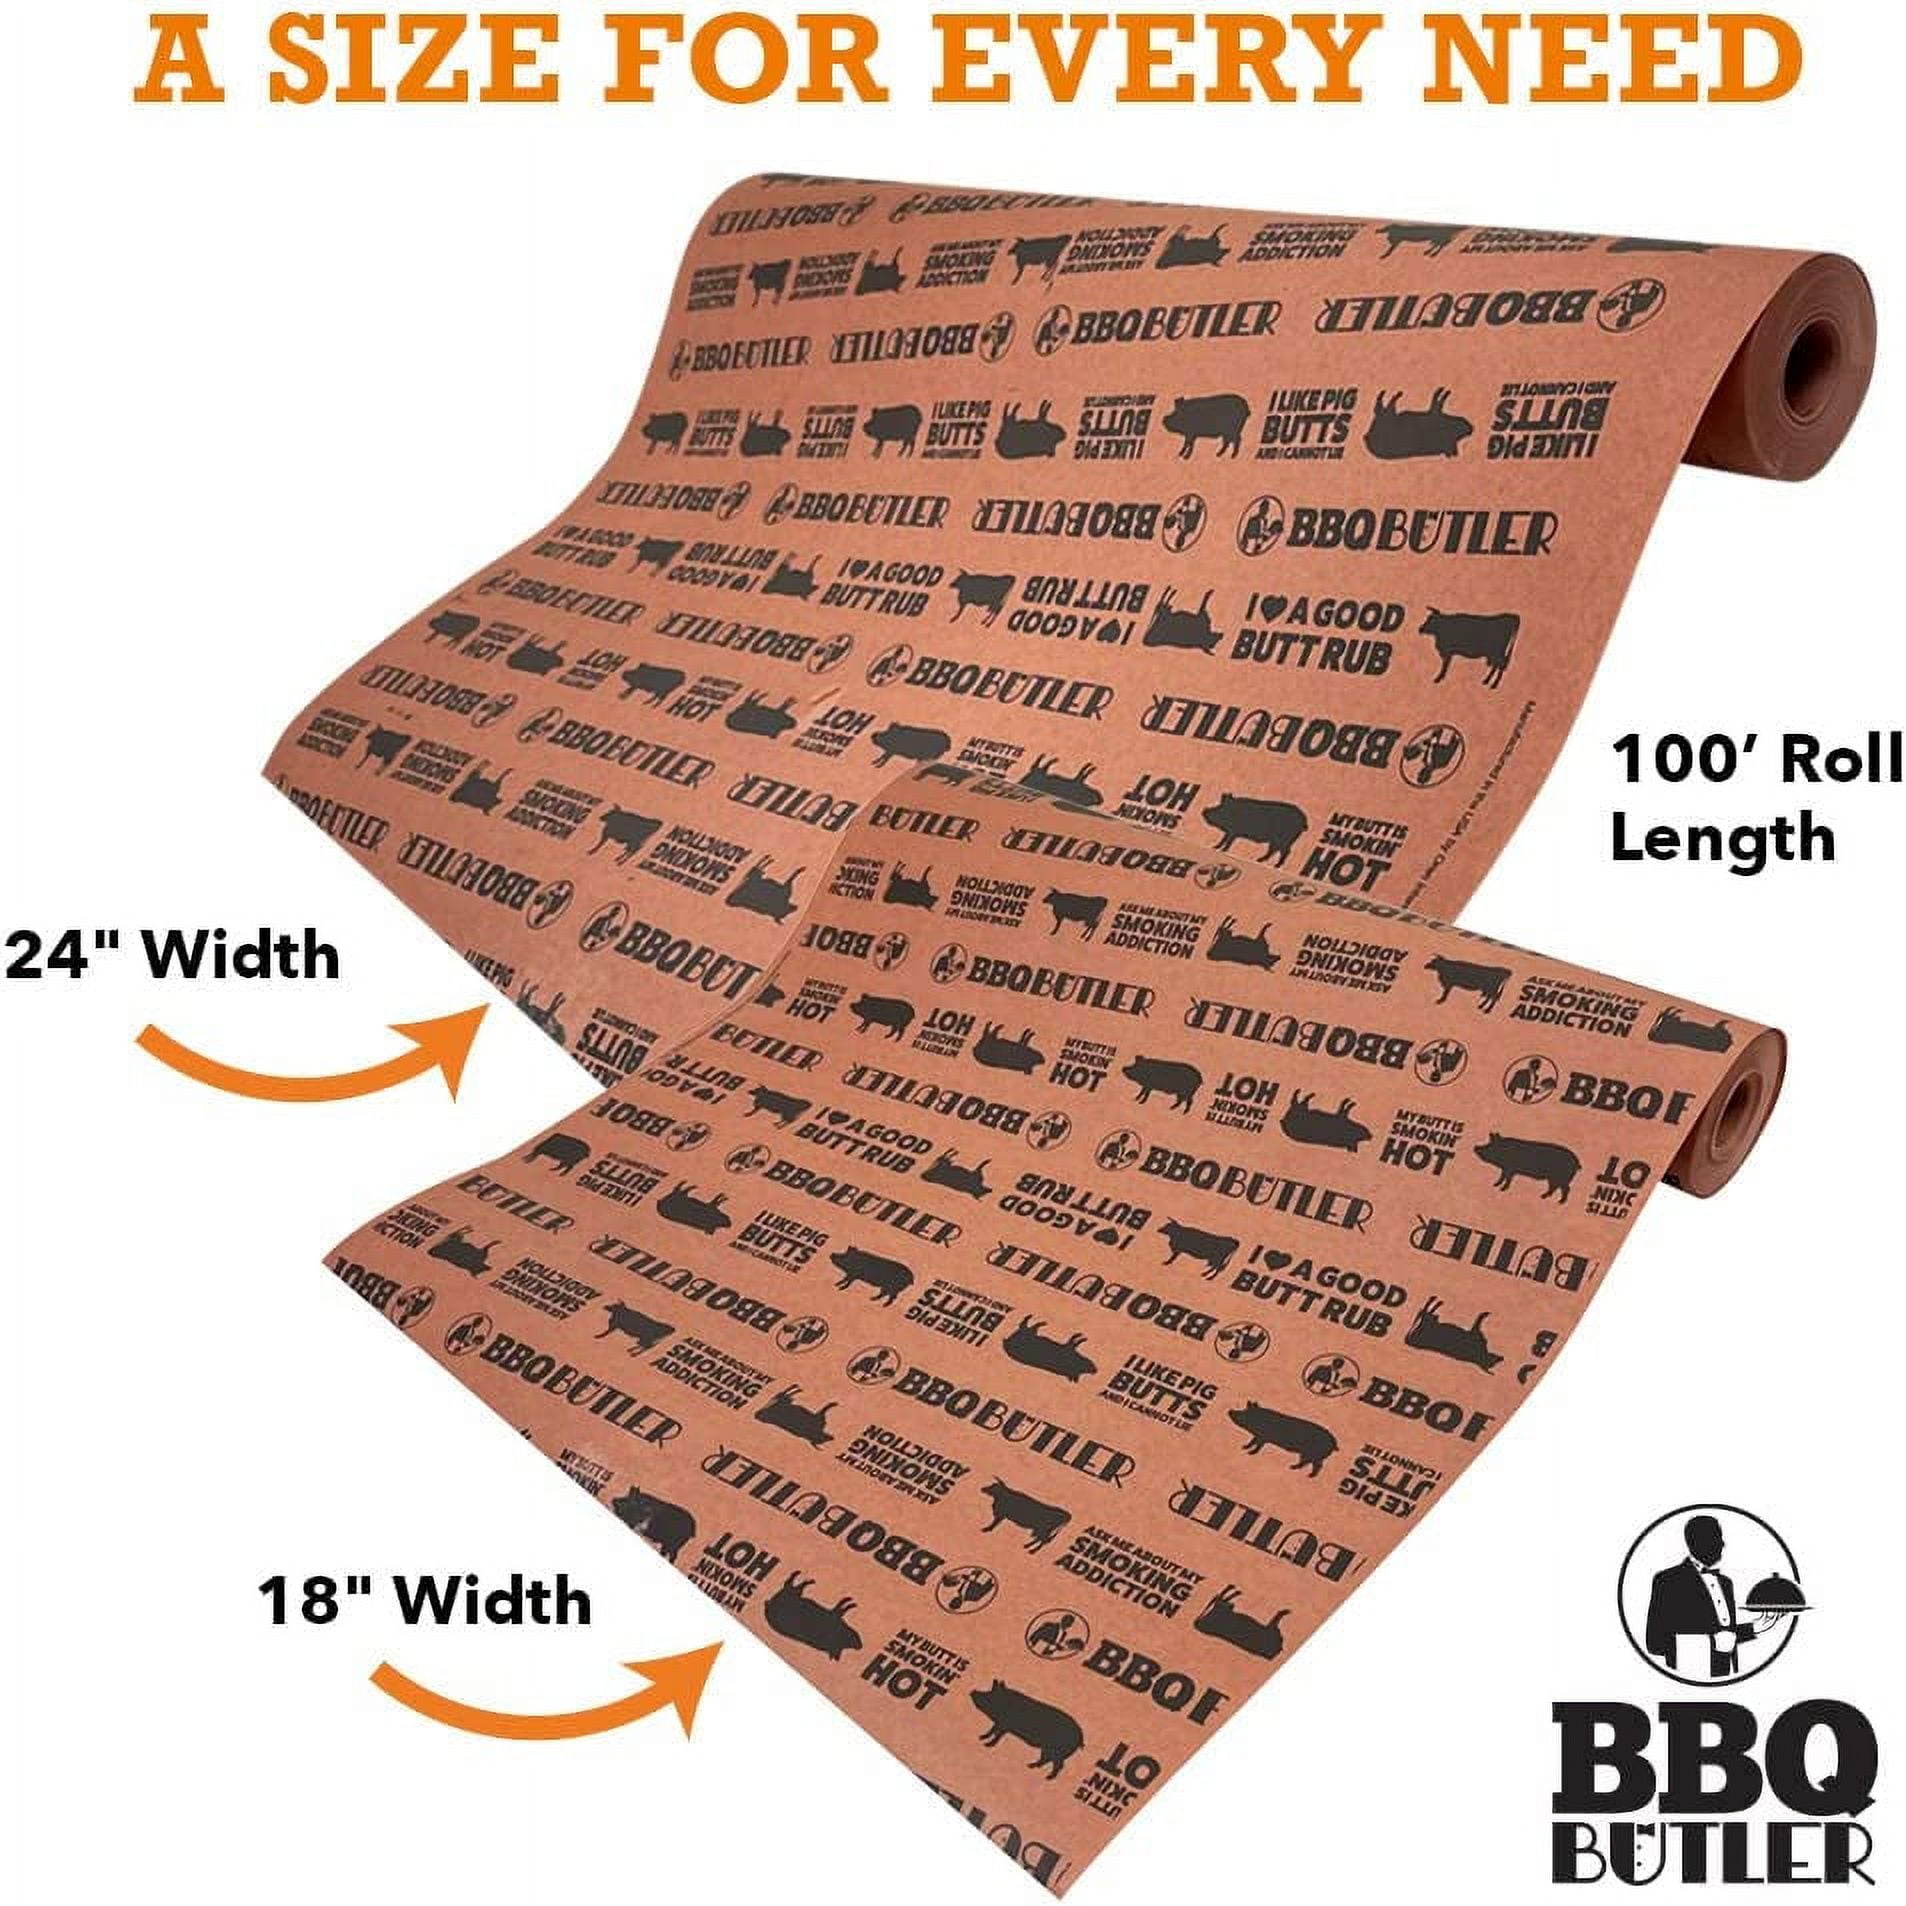 6 PACK] Pink Butcher Kraft Paper Roll Peach Meat Wrapping Paper 15 inch -  Roll for Briskets, BBQ Meat Smoking, Butcher, Food Service, Meat Paper (15  inches x 1000 Feet) by EcoQuality 